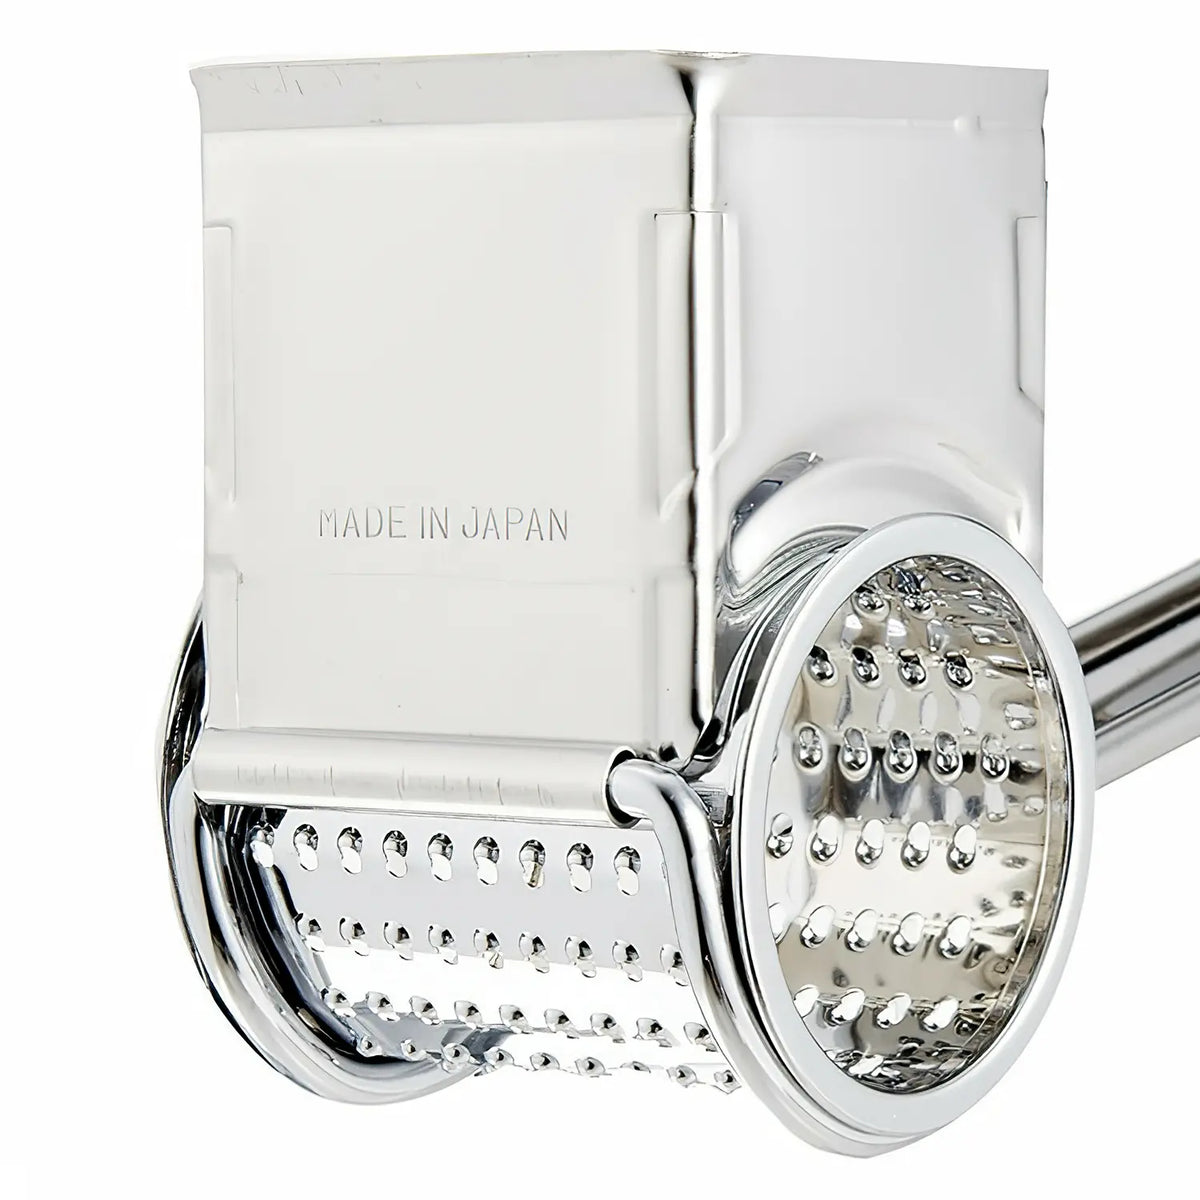 Stainless Steel Rotary Cheese Grater - Brilliant Promos - Be